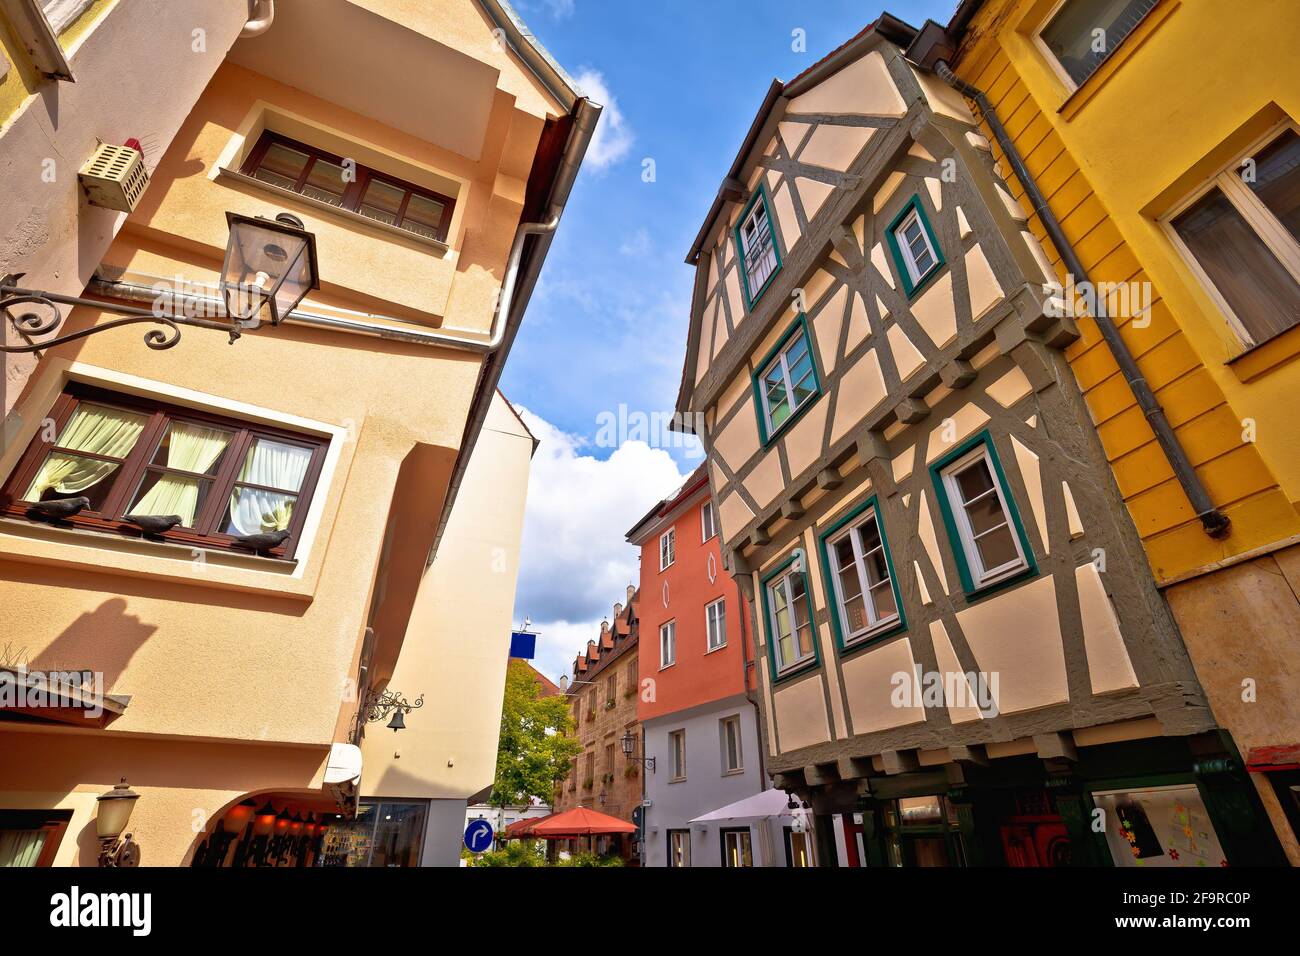 Ansbach. Old town of Ansbach picturesque street view, Bavaria region of Germany Stock Photo